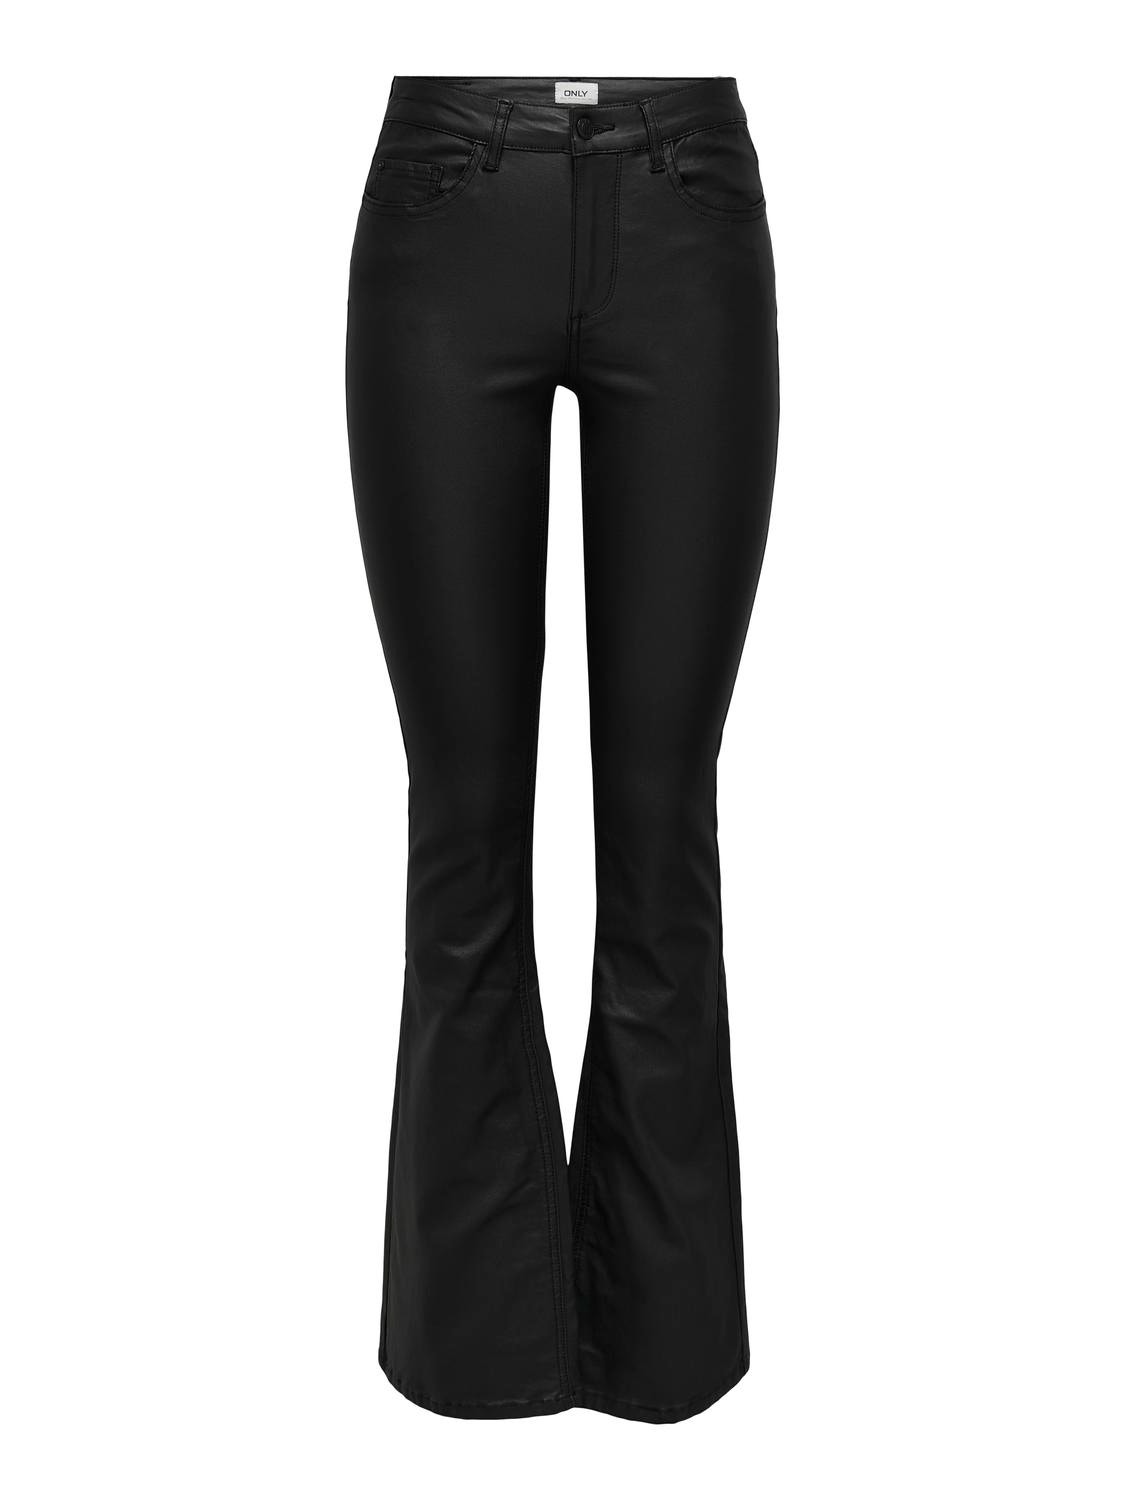 ONLY Skinny Fit Mid waist Flared legs Trousers -Black - 15310473